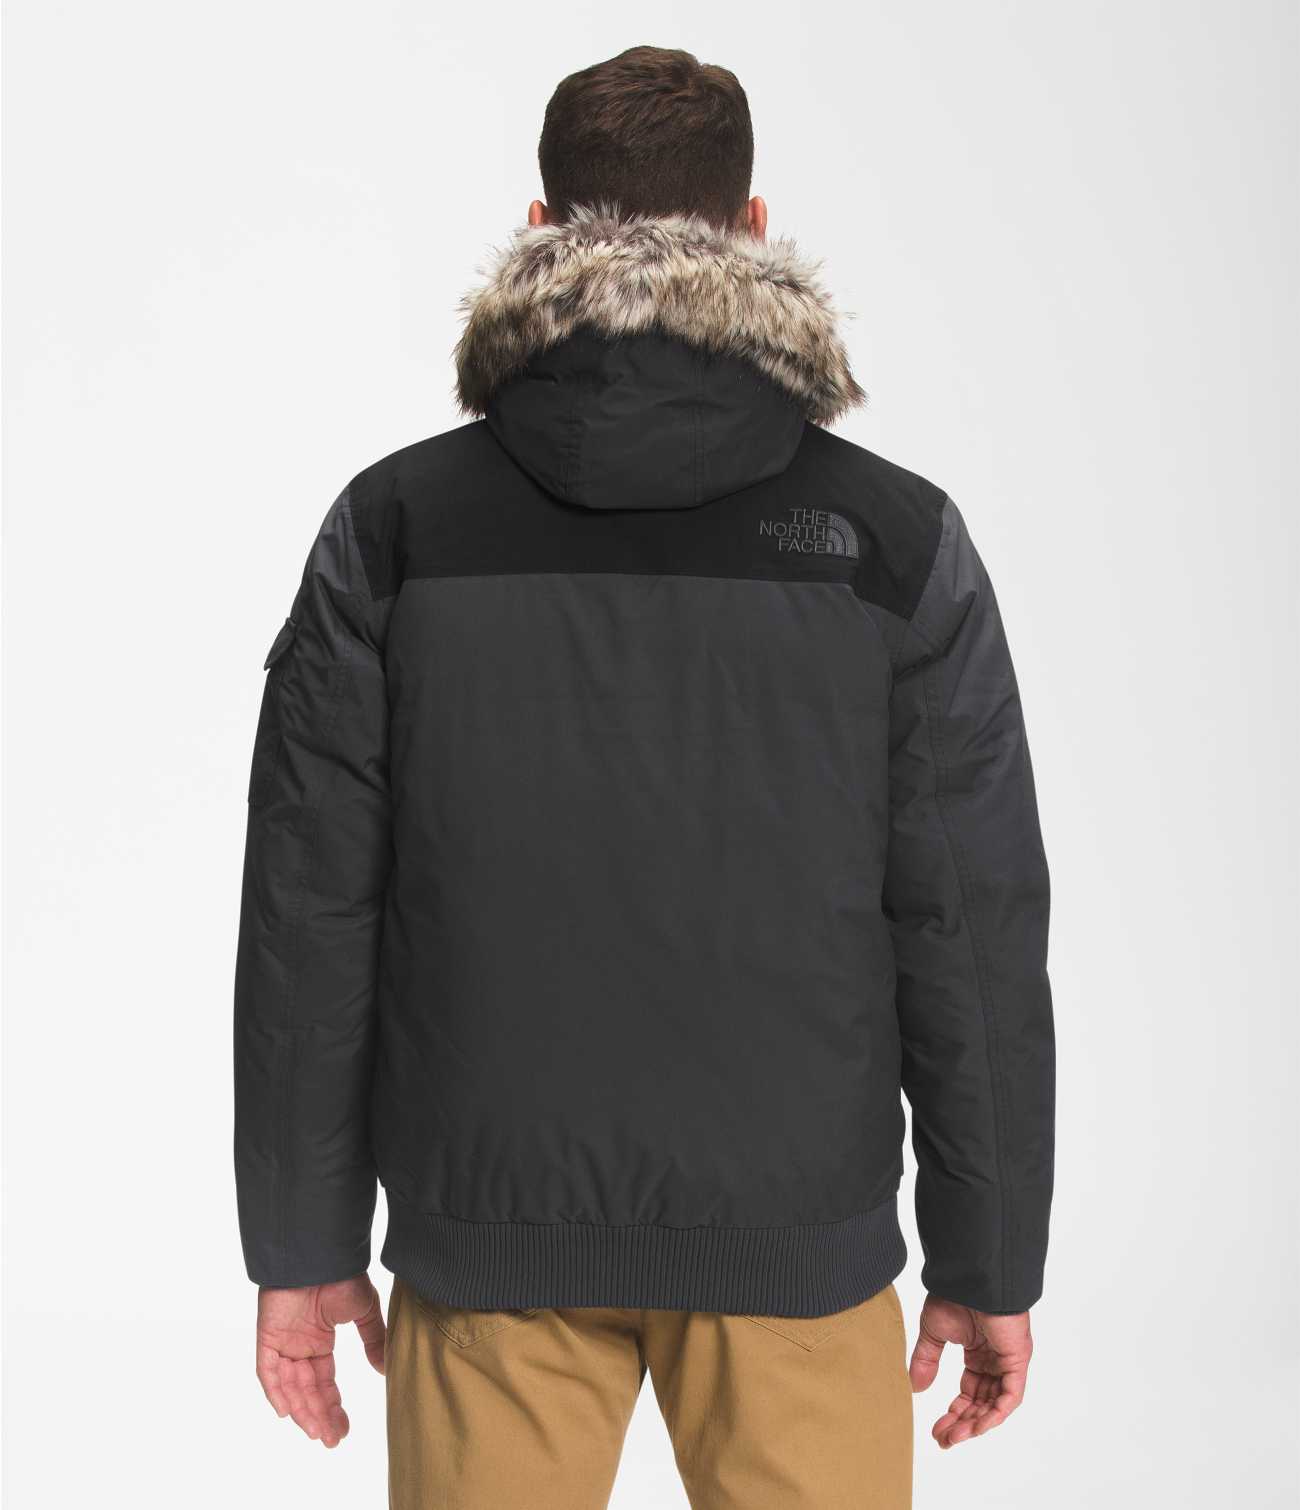 MEN'S GOTHAM JACKET III | The North Face | The North Face Renewed